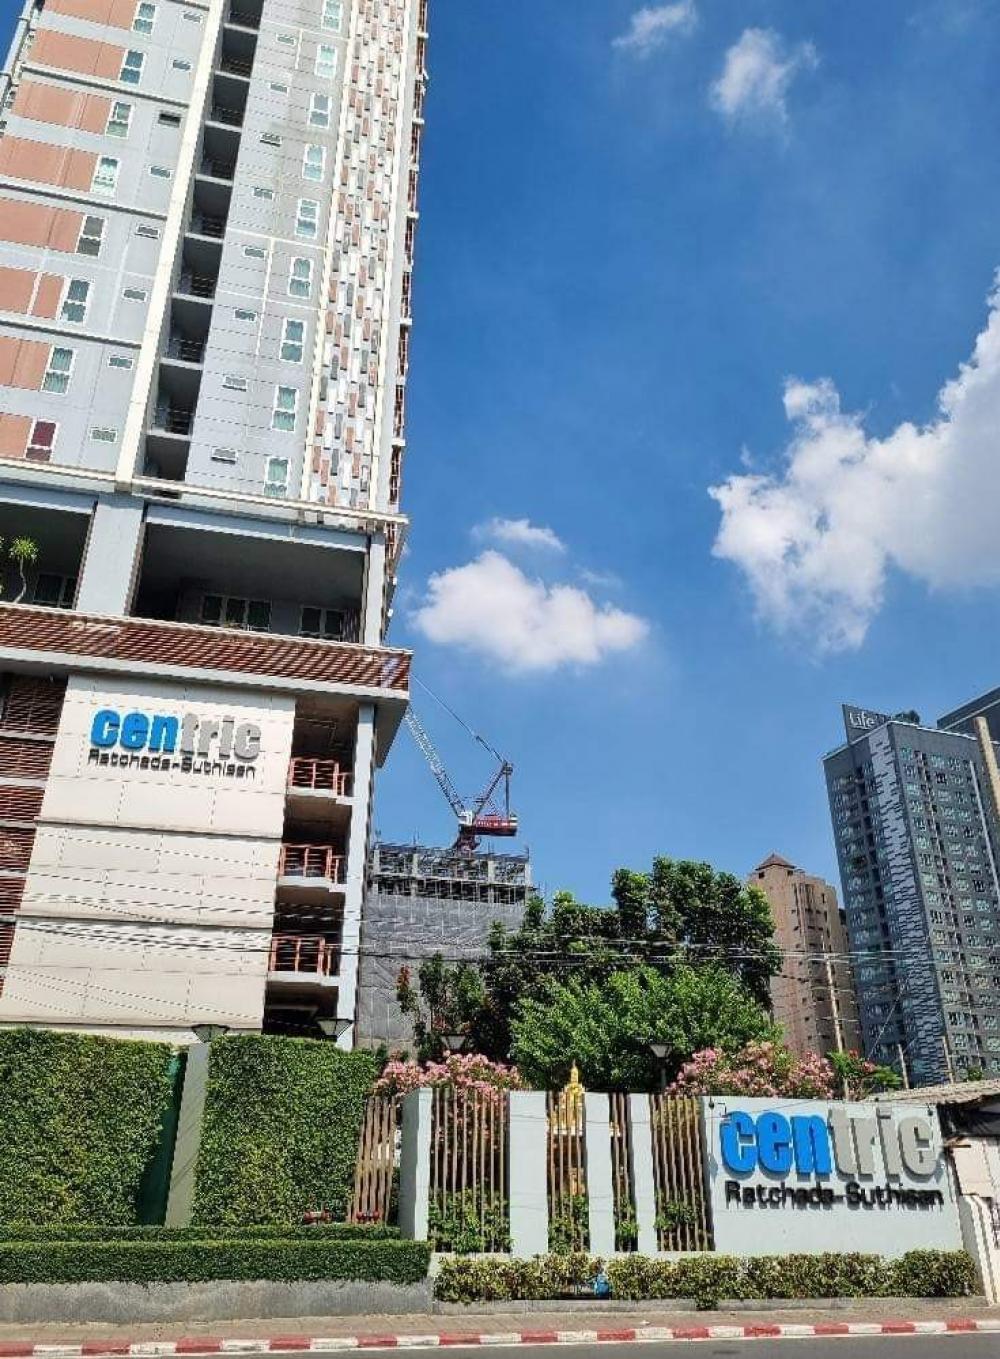 For RentCondoRatchadapisek, Huaikwang, Suttisan : ❤For sale/rent Condo Centric Ratchada Sutthisan, can enter and exit both Ratchada Road, connected to Vibhavadi.
 Near MRT Sutthisan 50 meters.
 🔰 Selling for 3.45 million baht, transfer half each 🔰 with tenant 🙏
 🔰1 year rent 14,000/month🔰
 Room details: